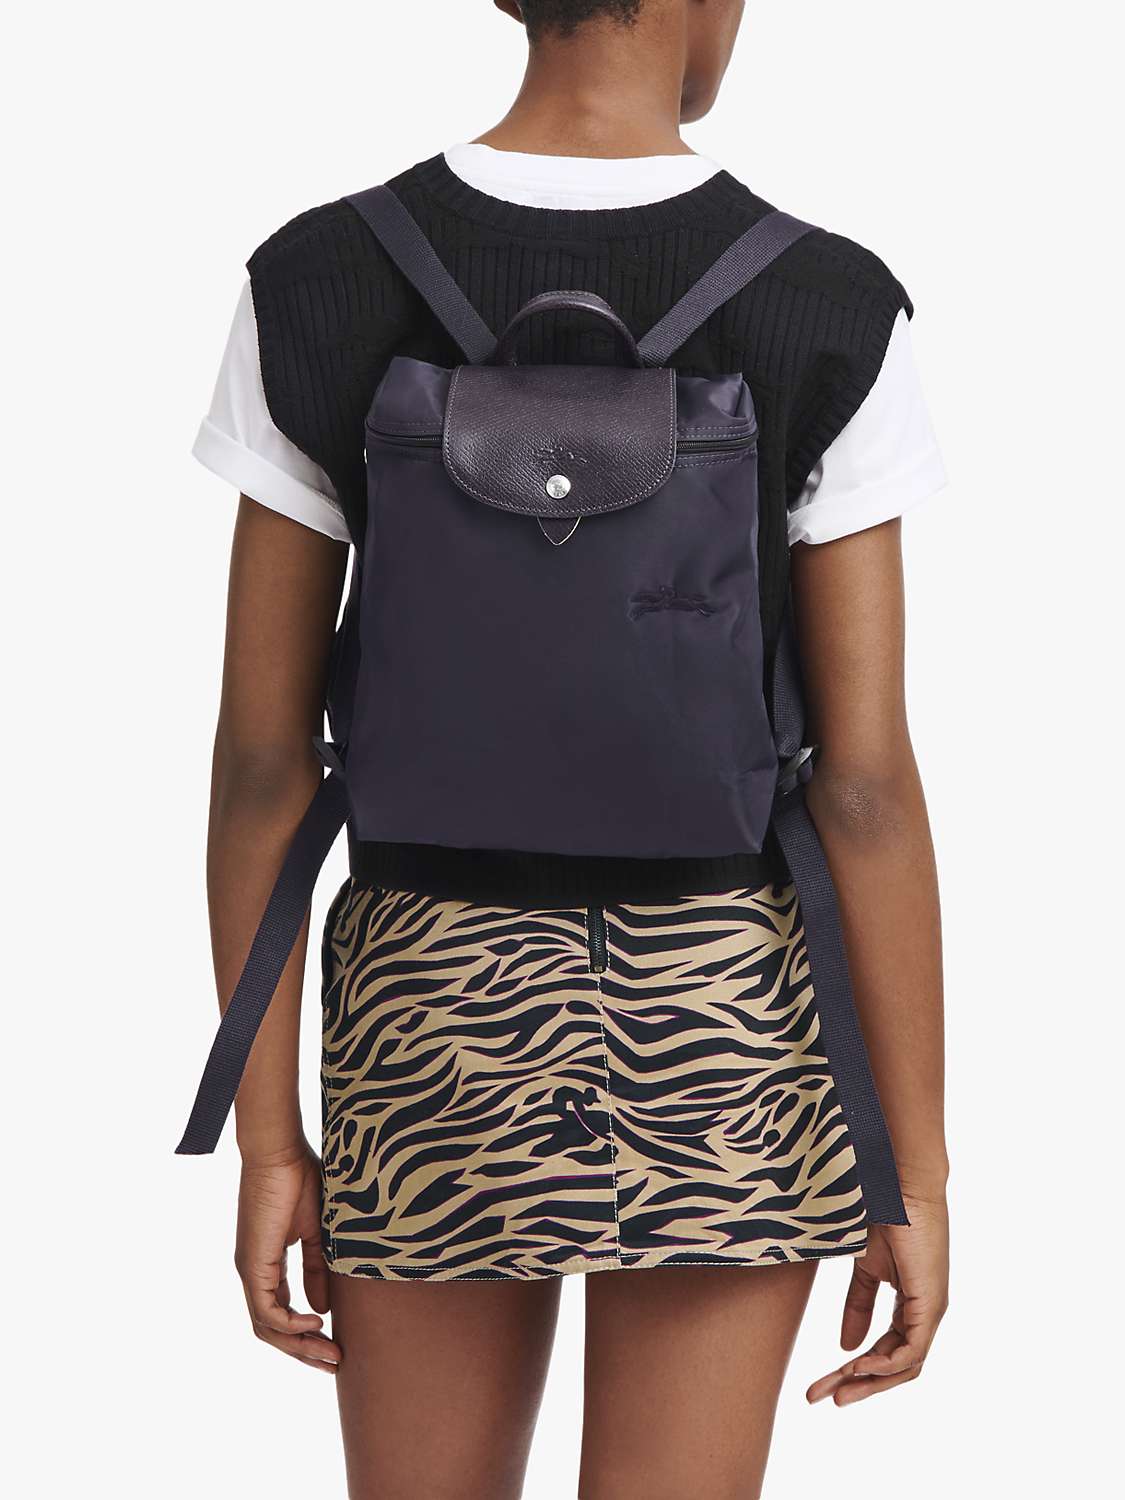 Buy Longchamp Le Pliage Recycled Canvas Backpack Online at johnlewis.com